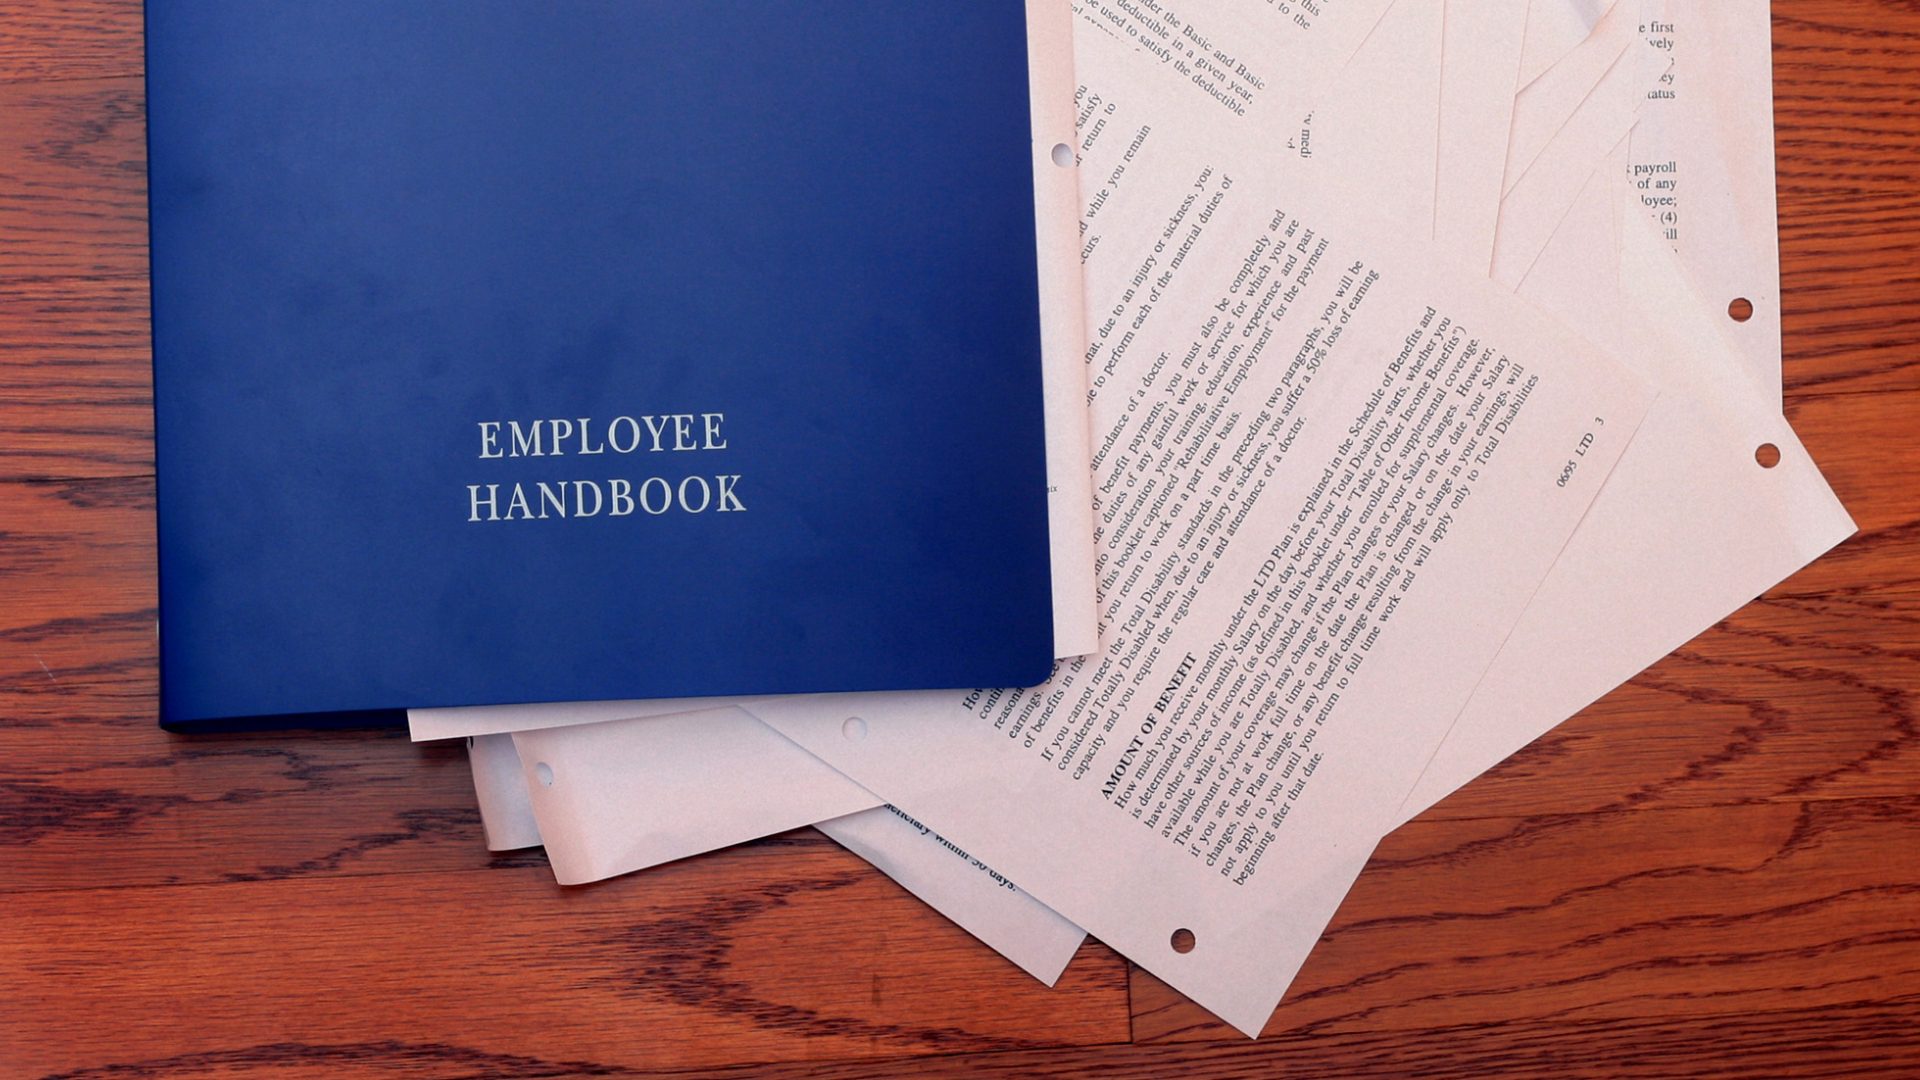 A blue book with "EMPLOYEE HANDBOOK" on the front cover lies on top of a messy stack of papers on a wood surface